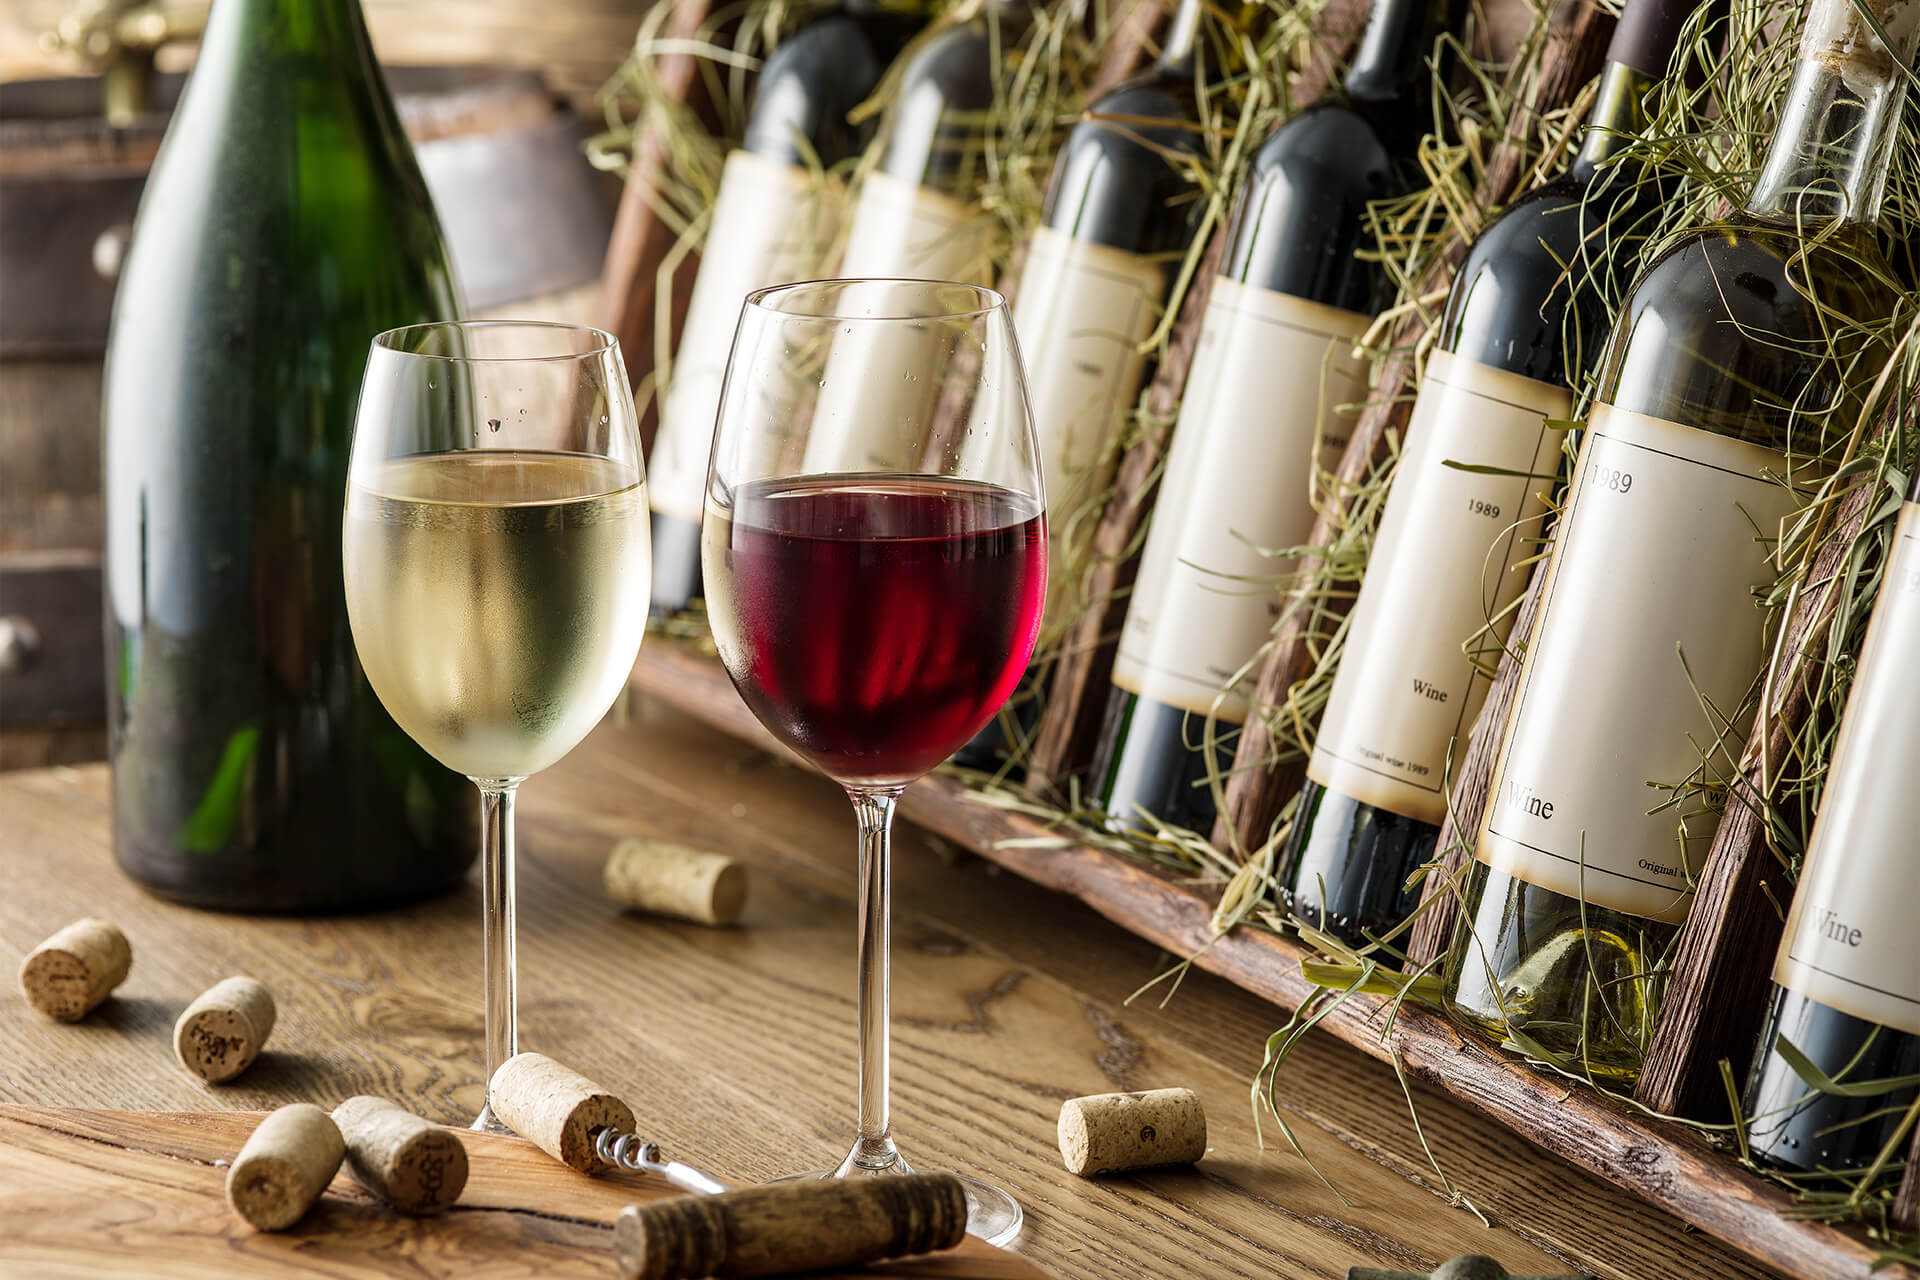 We have a wide selection of wines from all over the world to pair with our delicious food.